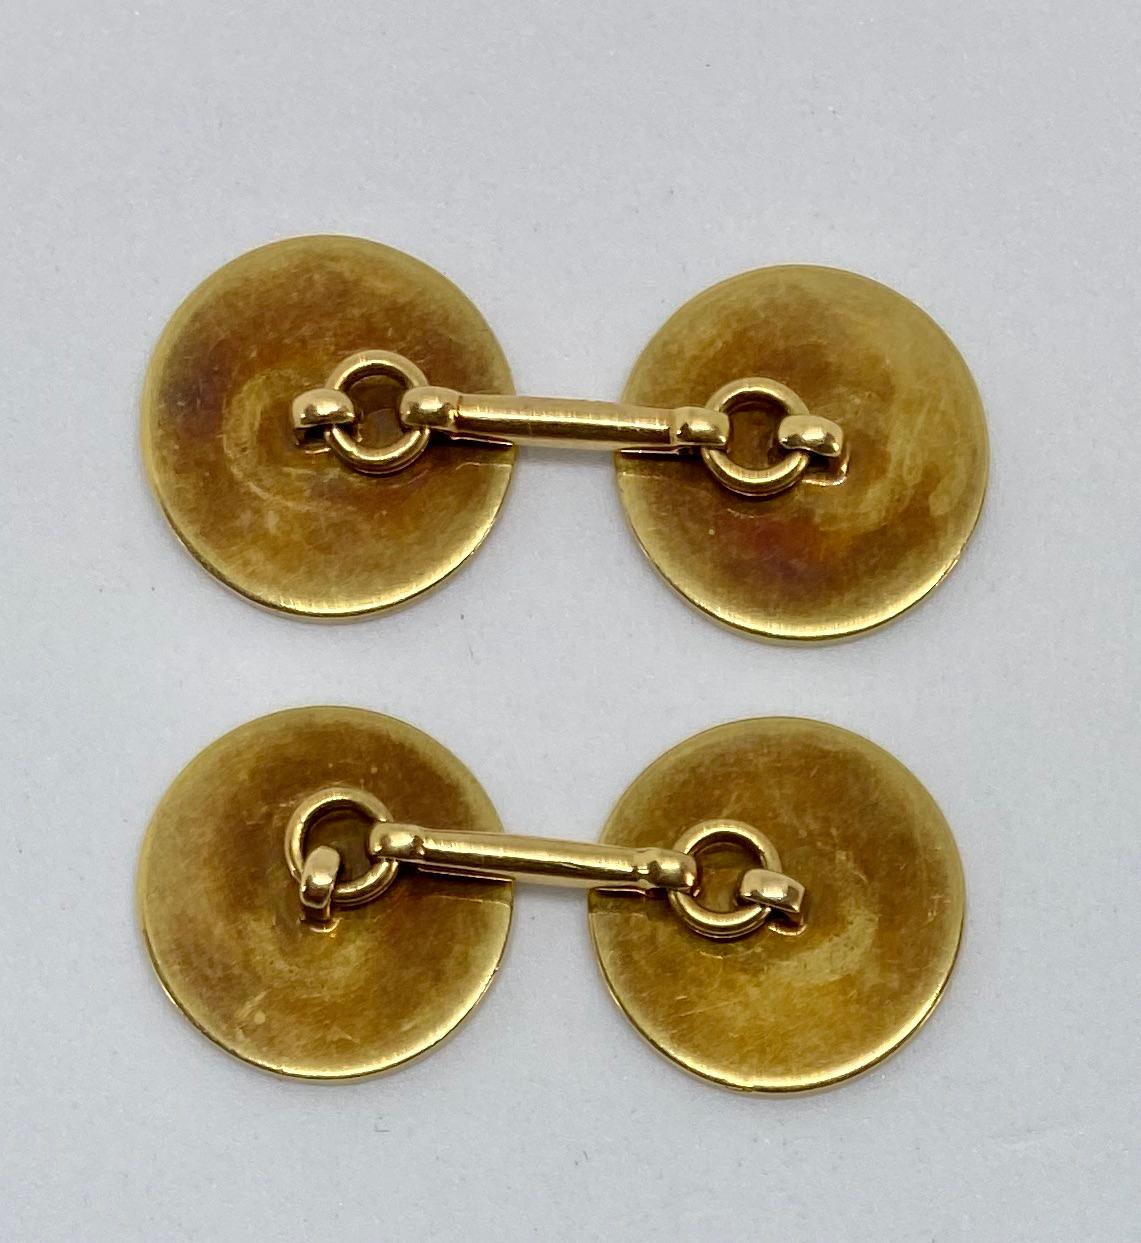 Double-Sided Cufflinks with Yellow Gold and Creme-Colored Enamel In Fair Condition For Sale In San Rafael, CA